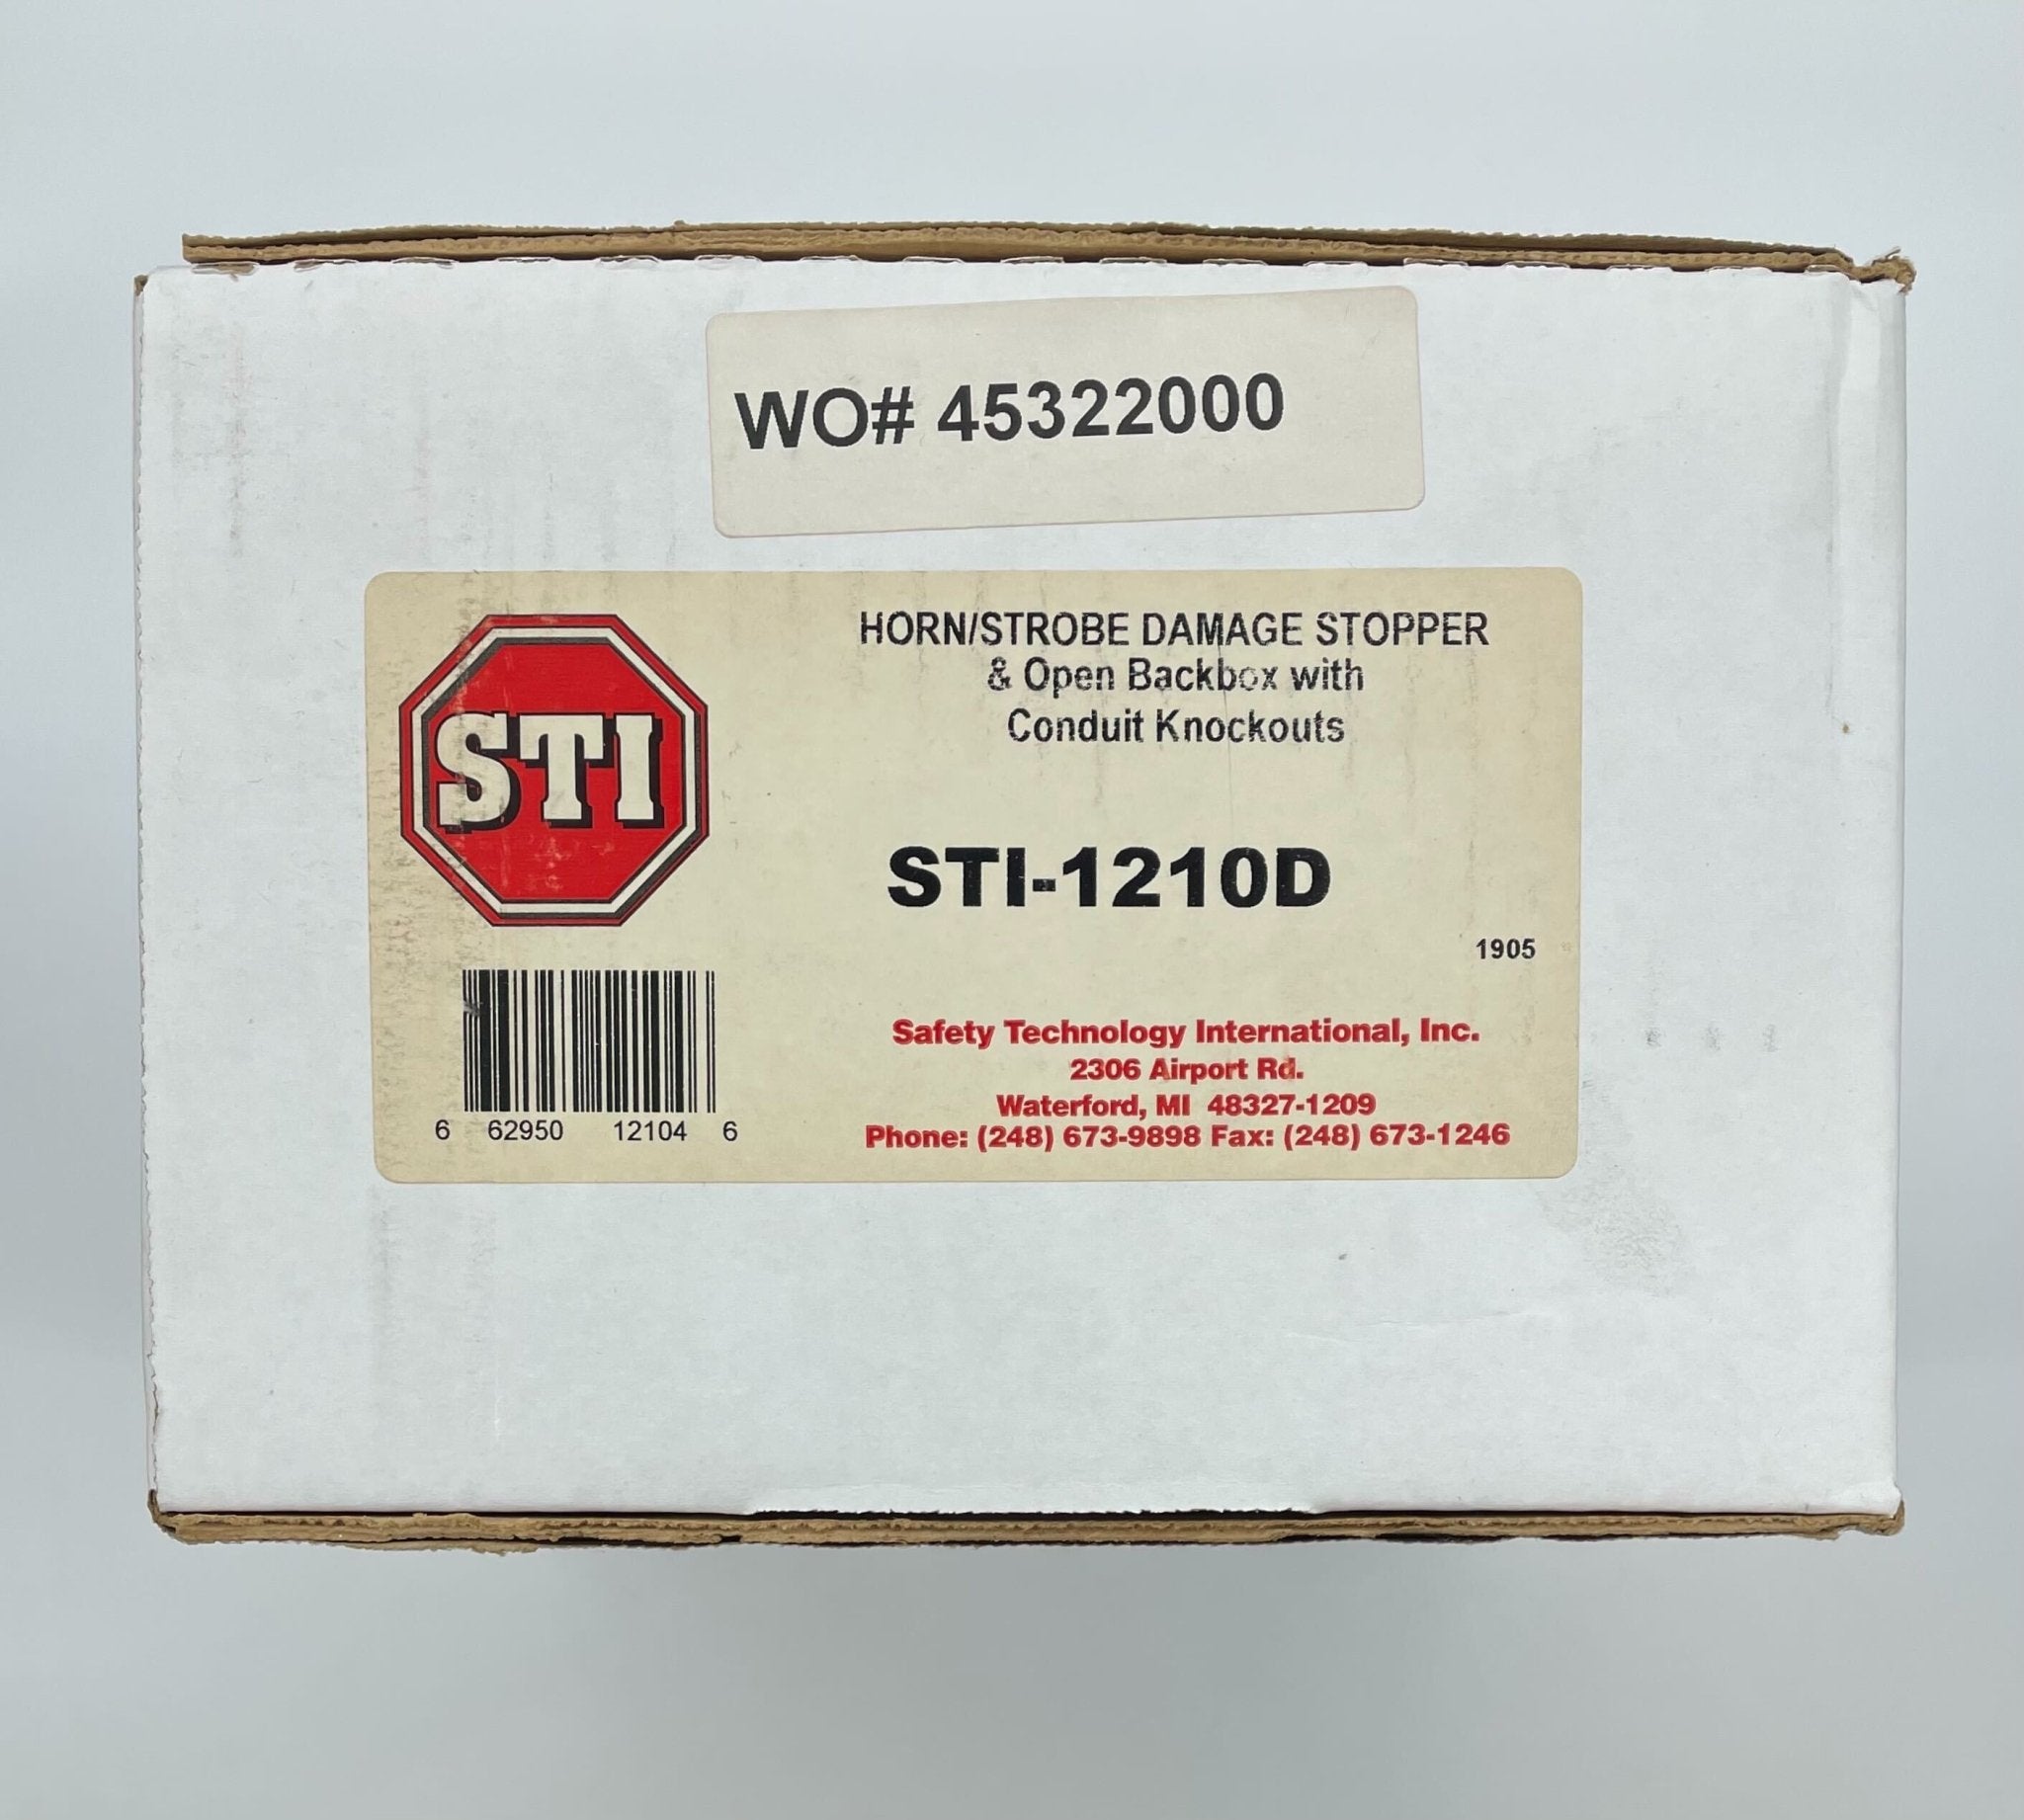 STI-1210D Horn/Strobe Damage Stopper and Open Back Box with Conduit Knockout - The Fire Alarm Supplier